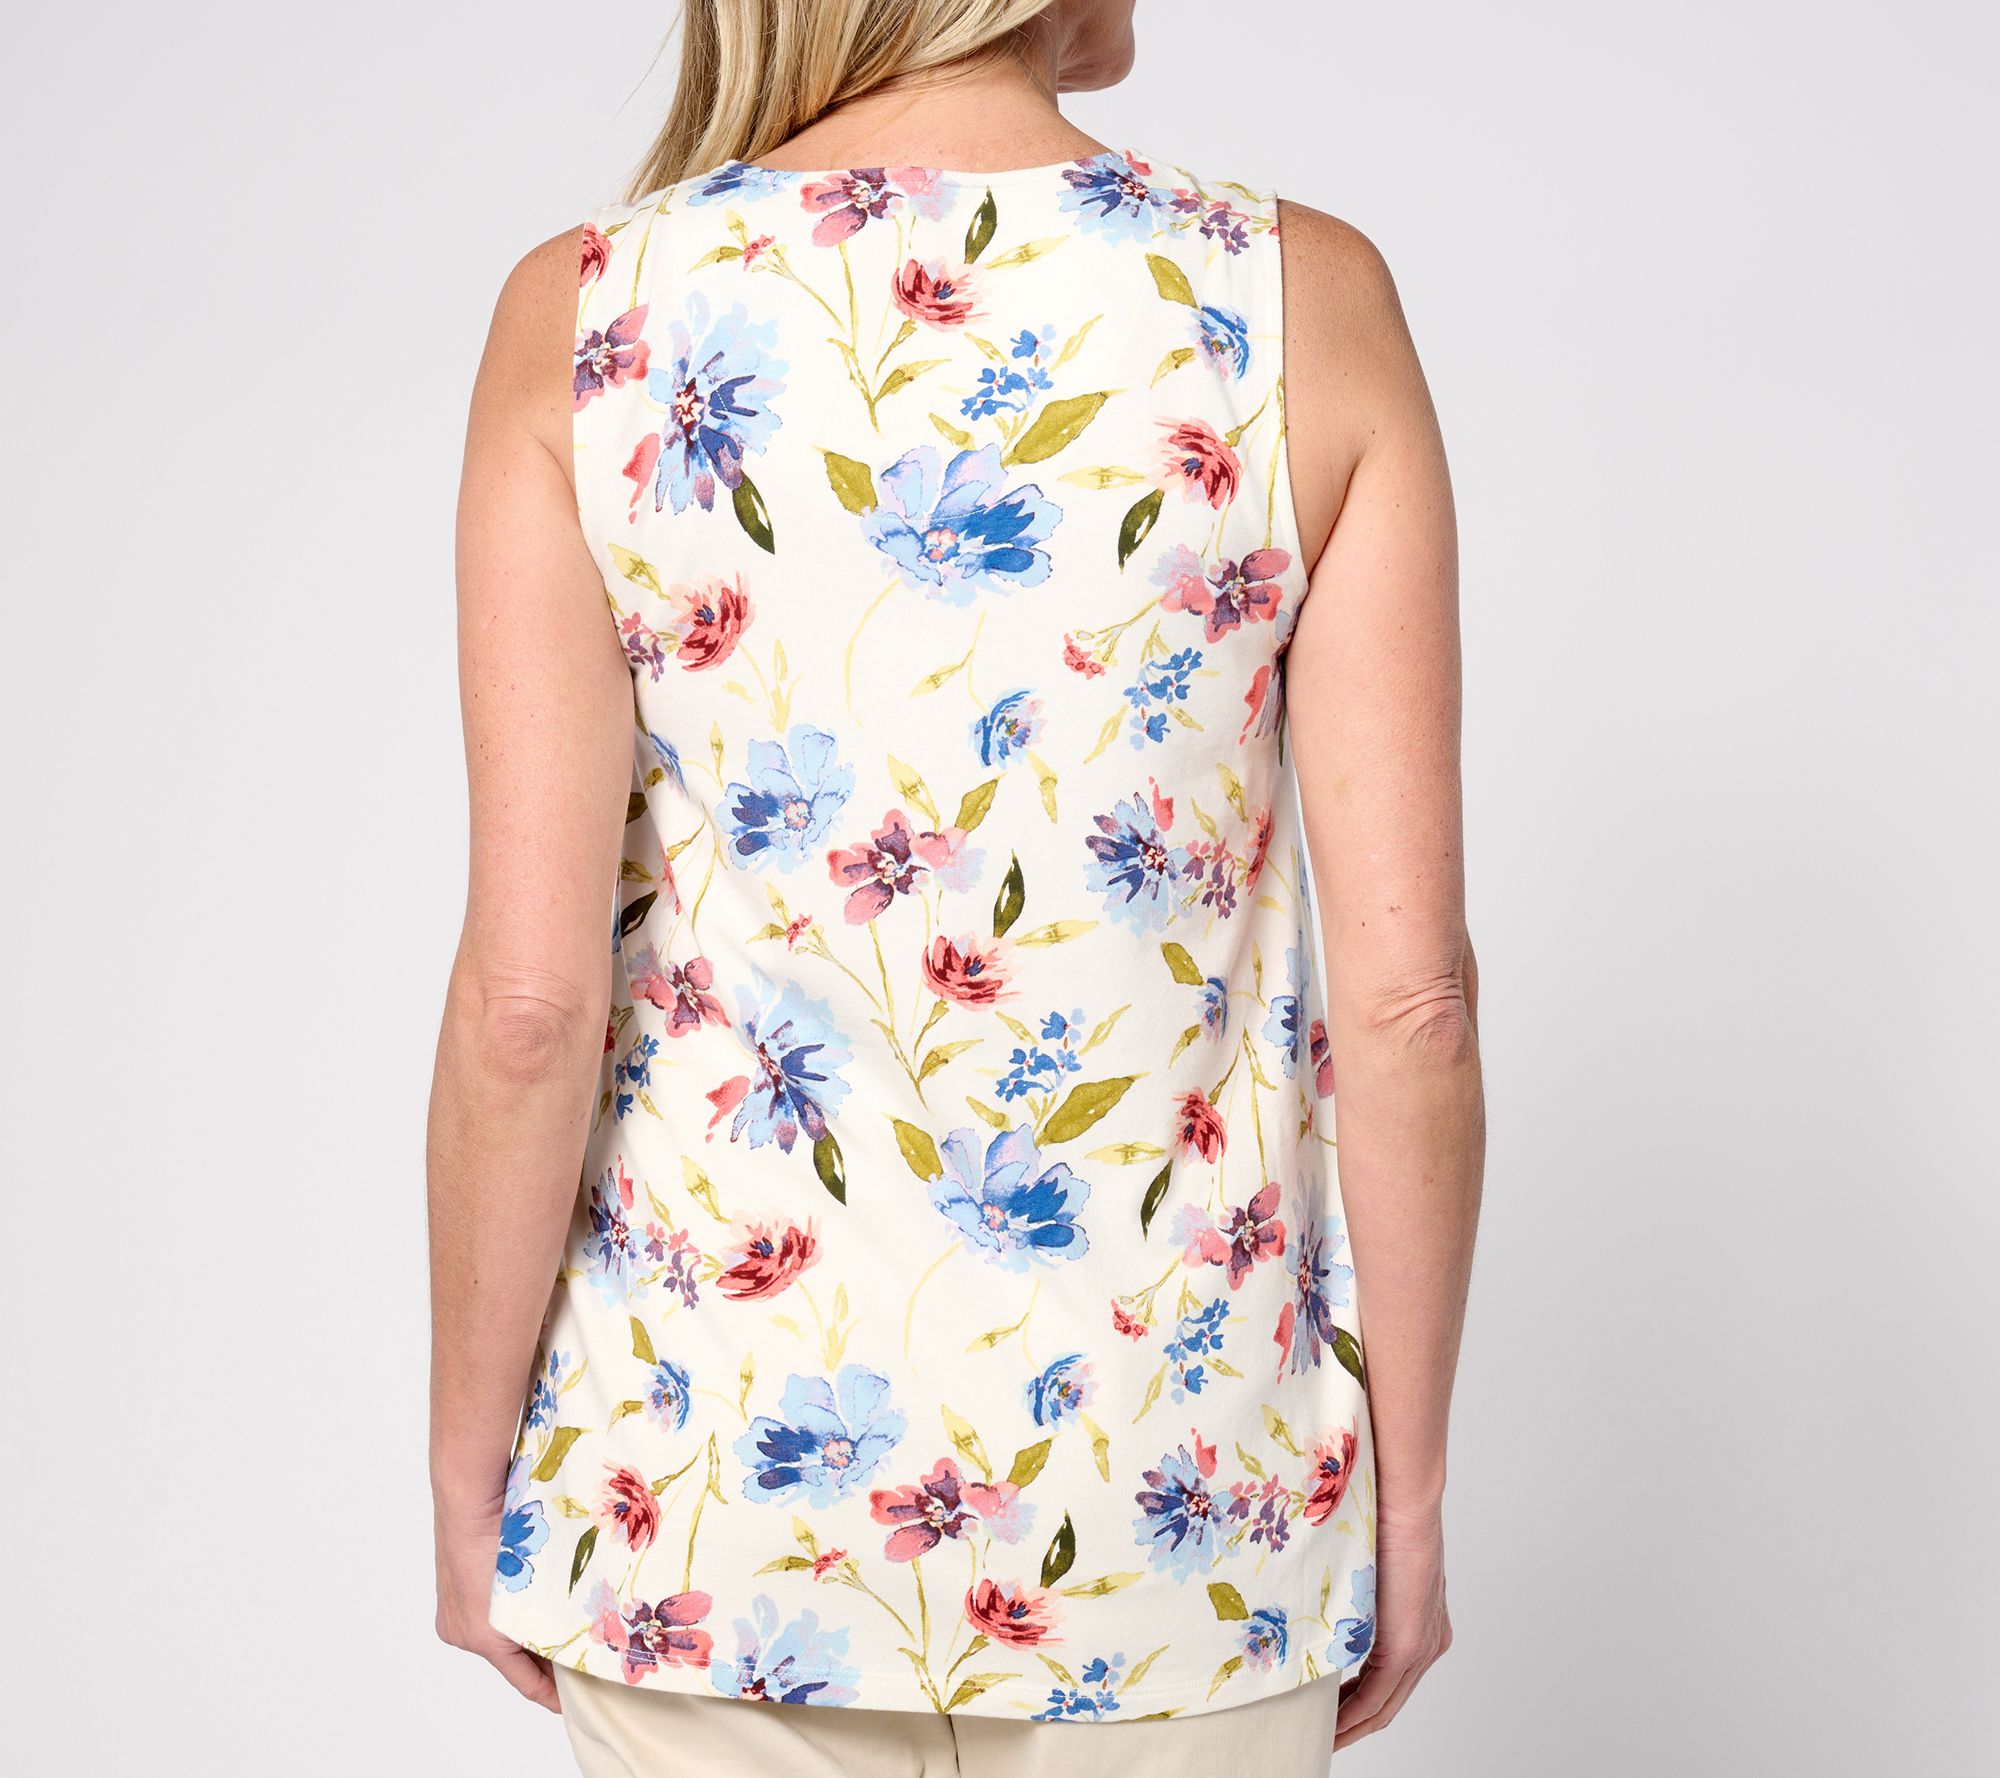 5 Tank Tops to Pair with Jeans - Beyoutiful Blog